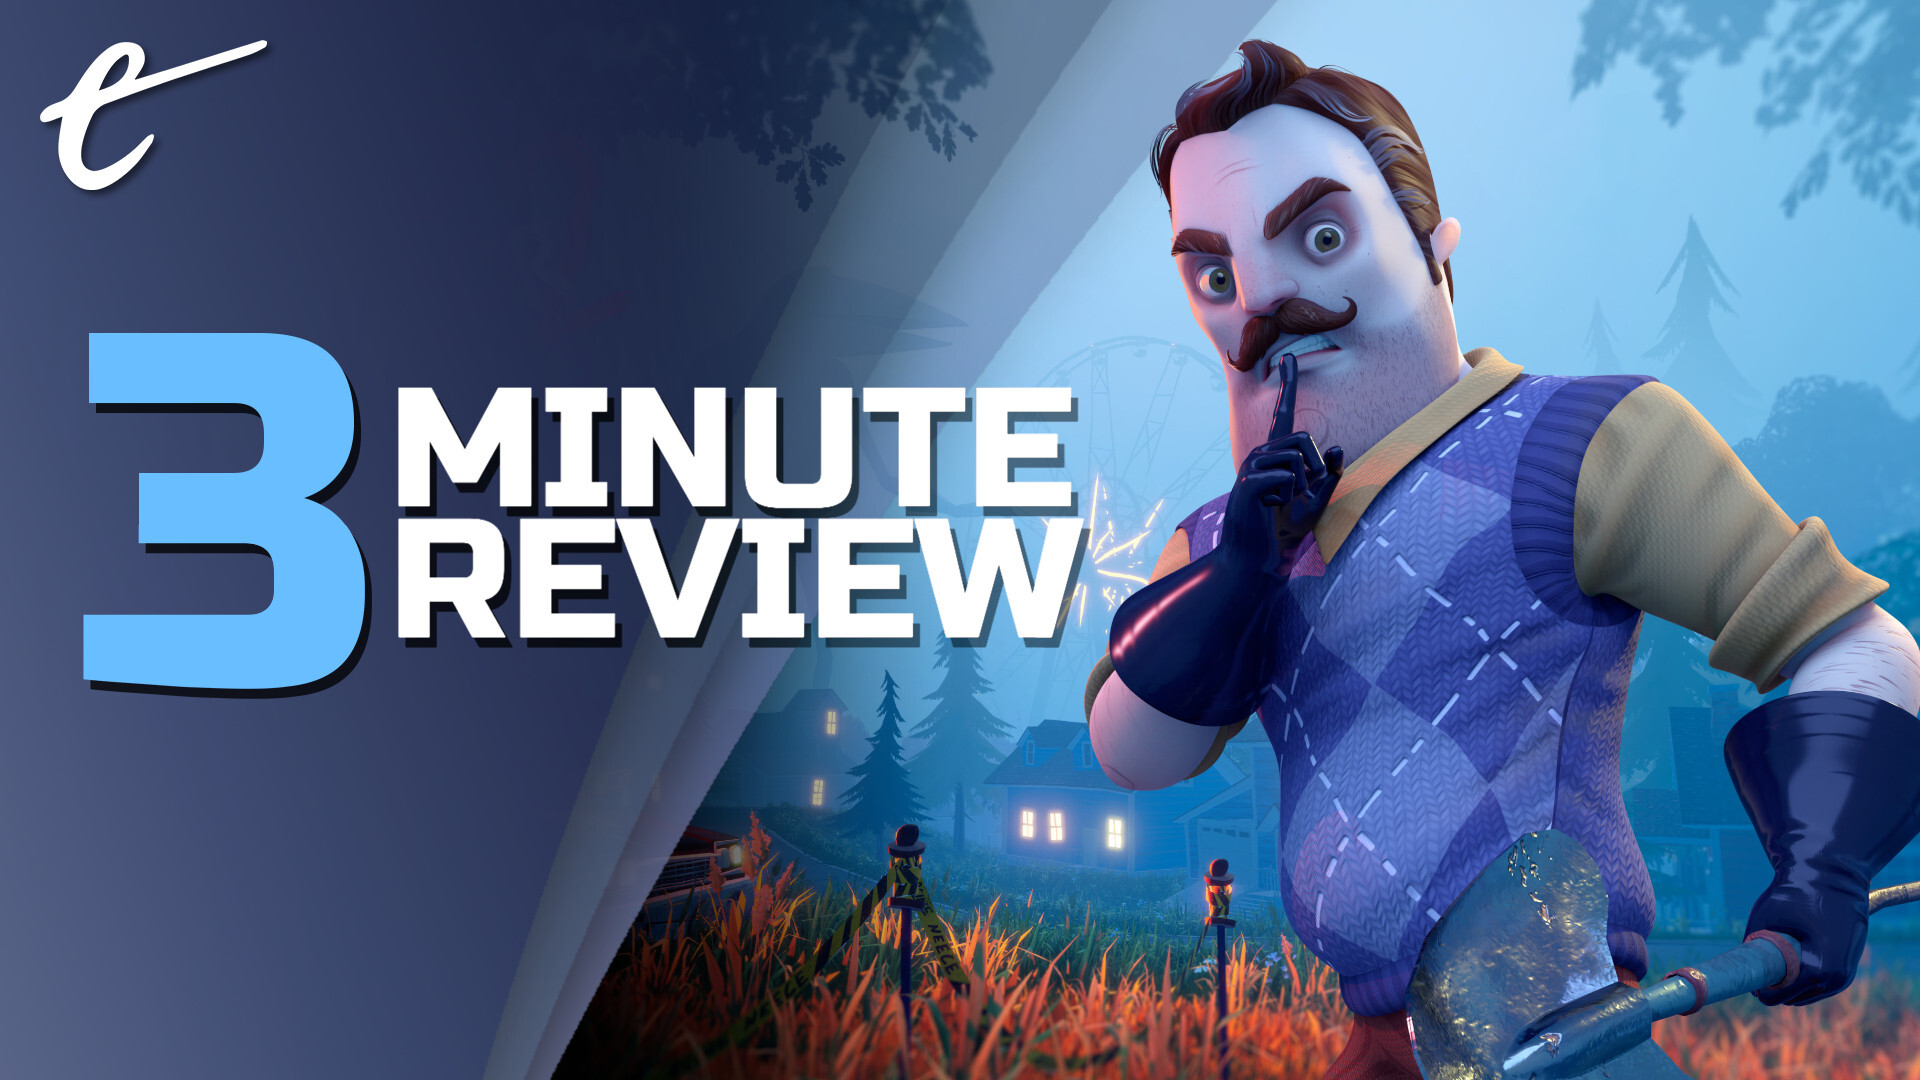 Hello Neighbor 2 Review in 3 Minutes - A Very Lacking Sequel